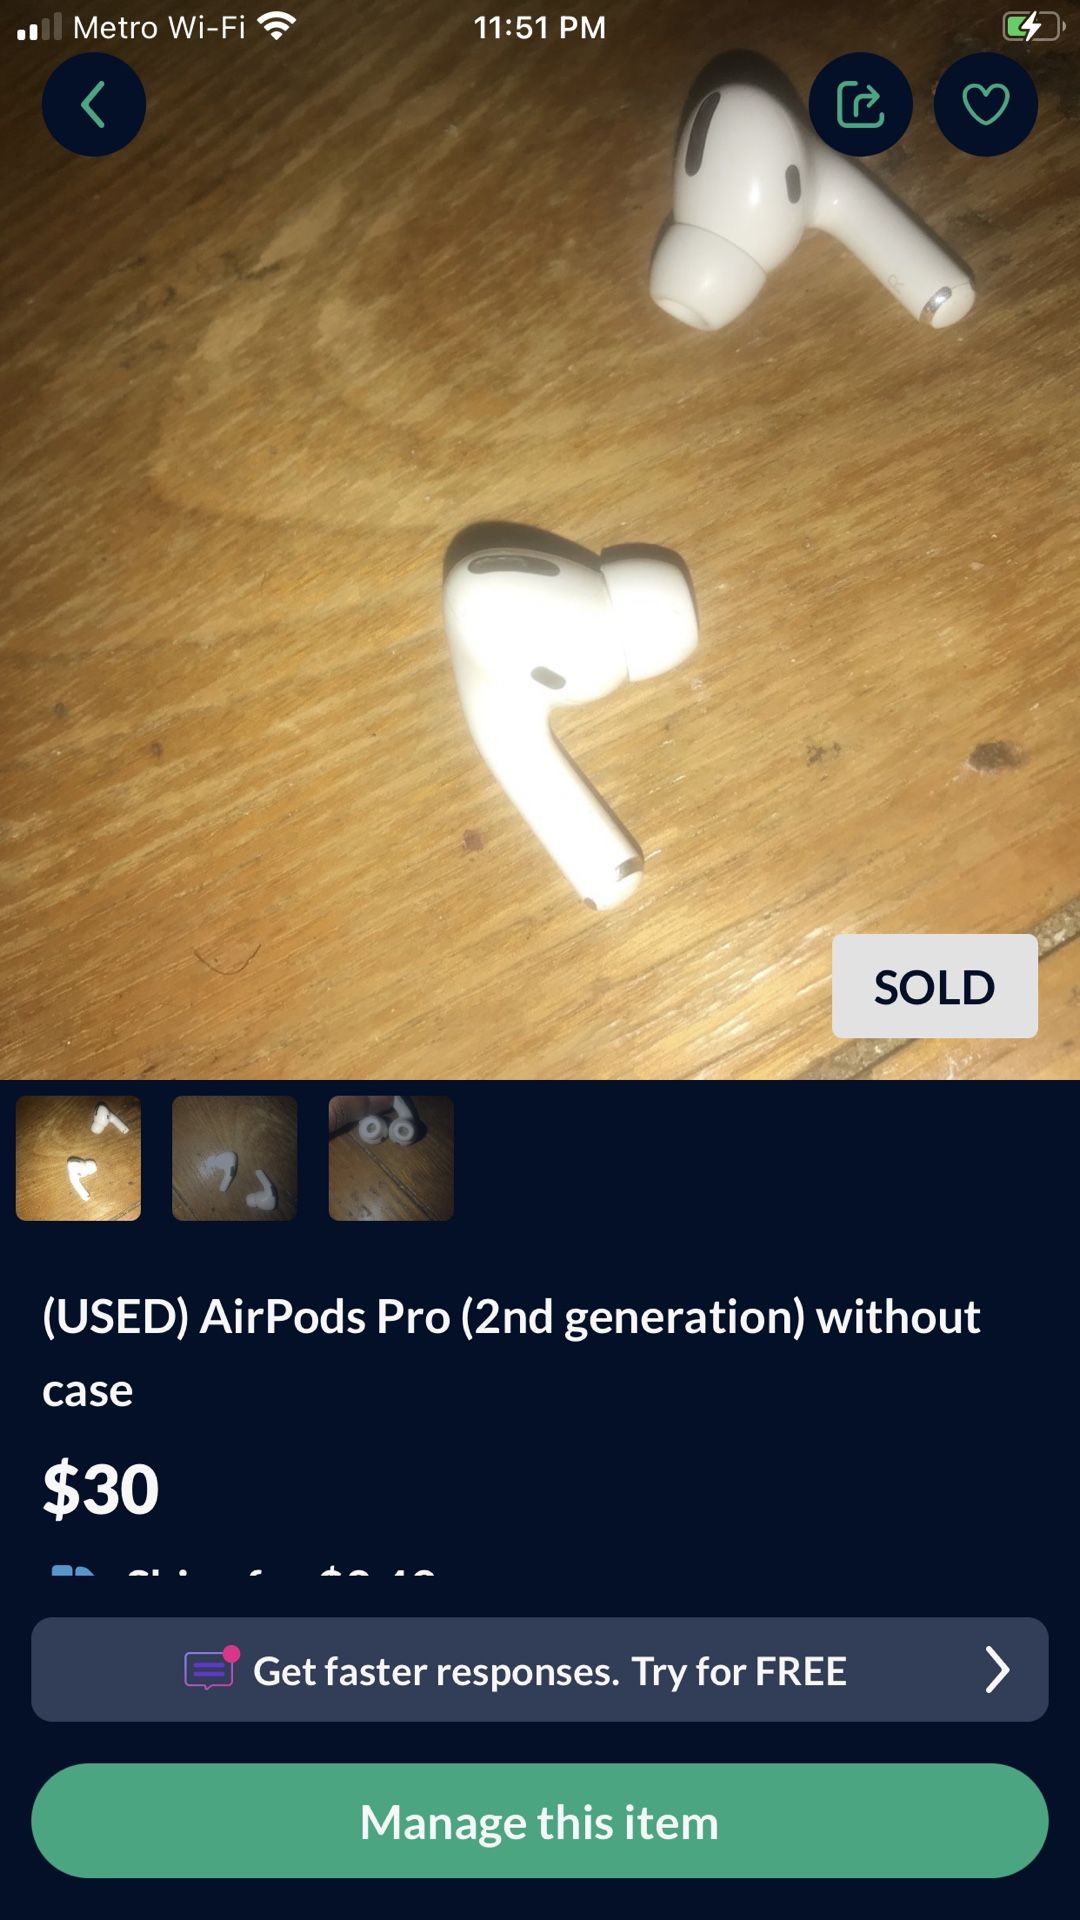 (USED) AirPods Pro (2nd generation) without case